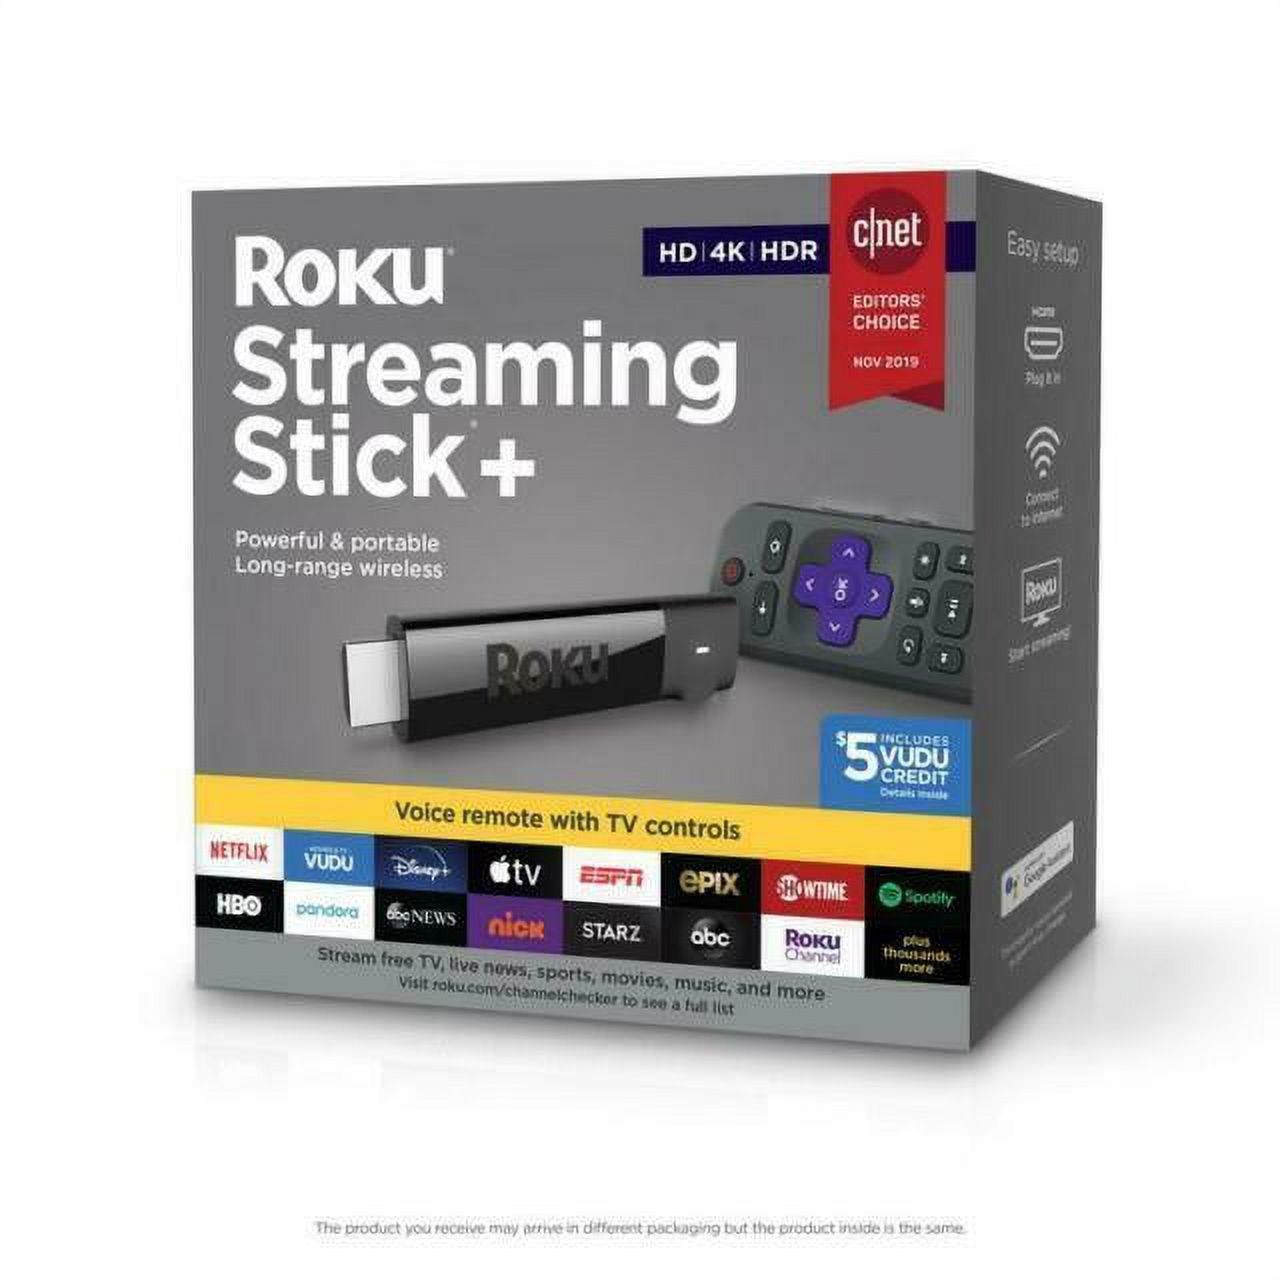 Roku Streaming Stick+ | HD/4K/HDR Streaming Device with Long-range Wireless and Roku Voice Remote with TV Controls - image 1 of 14